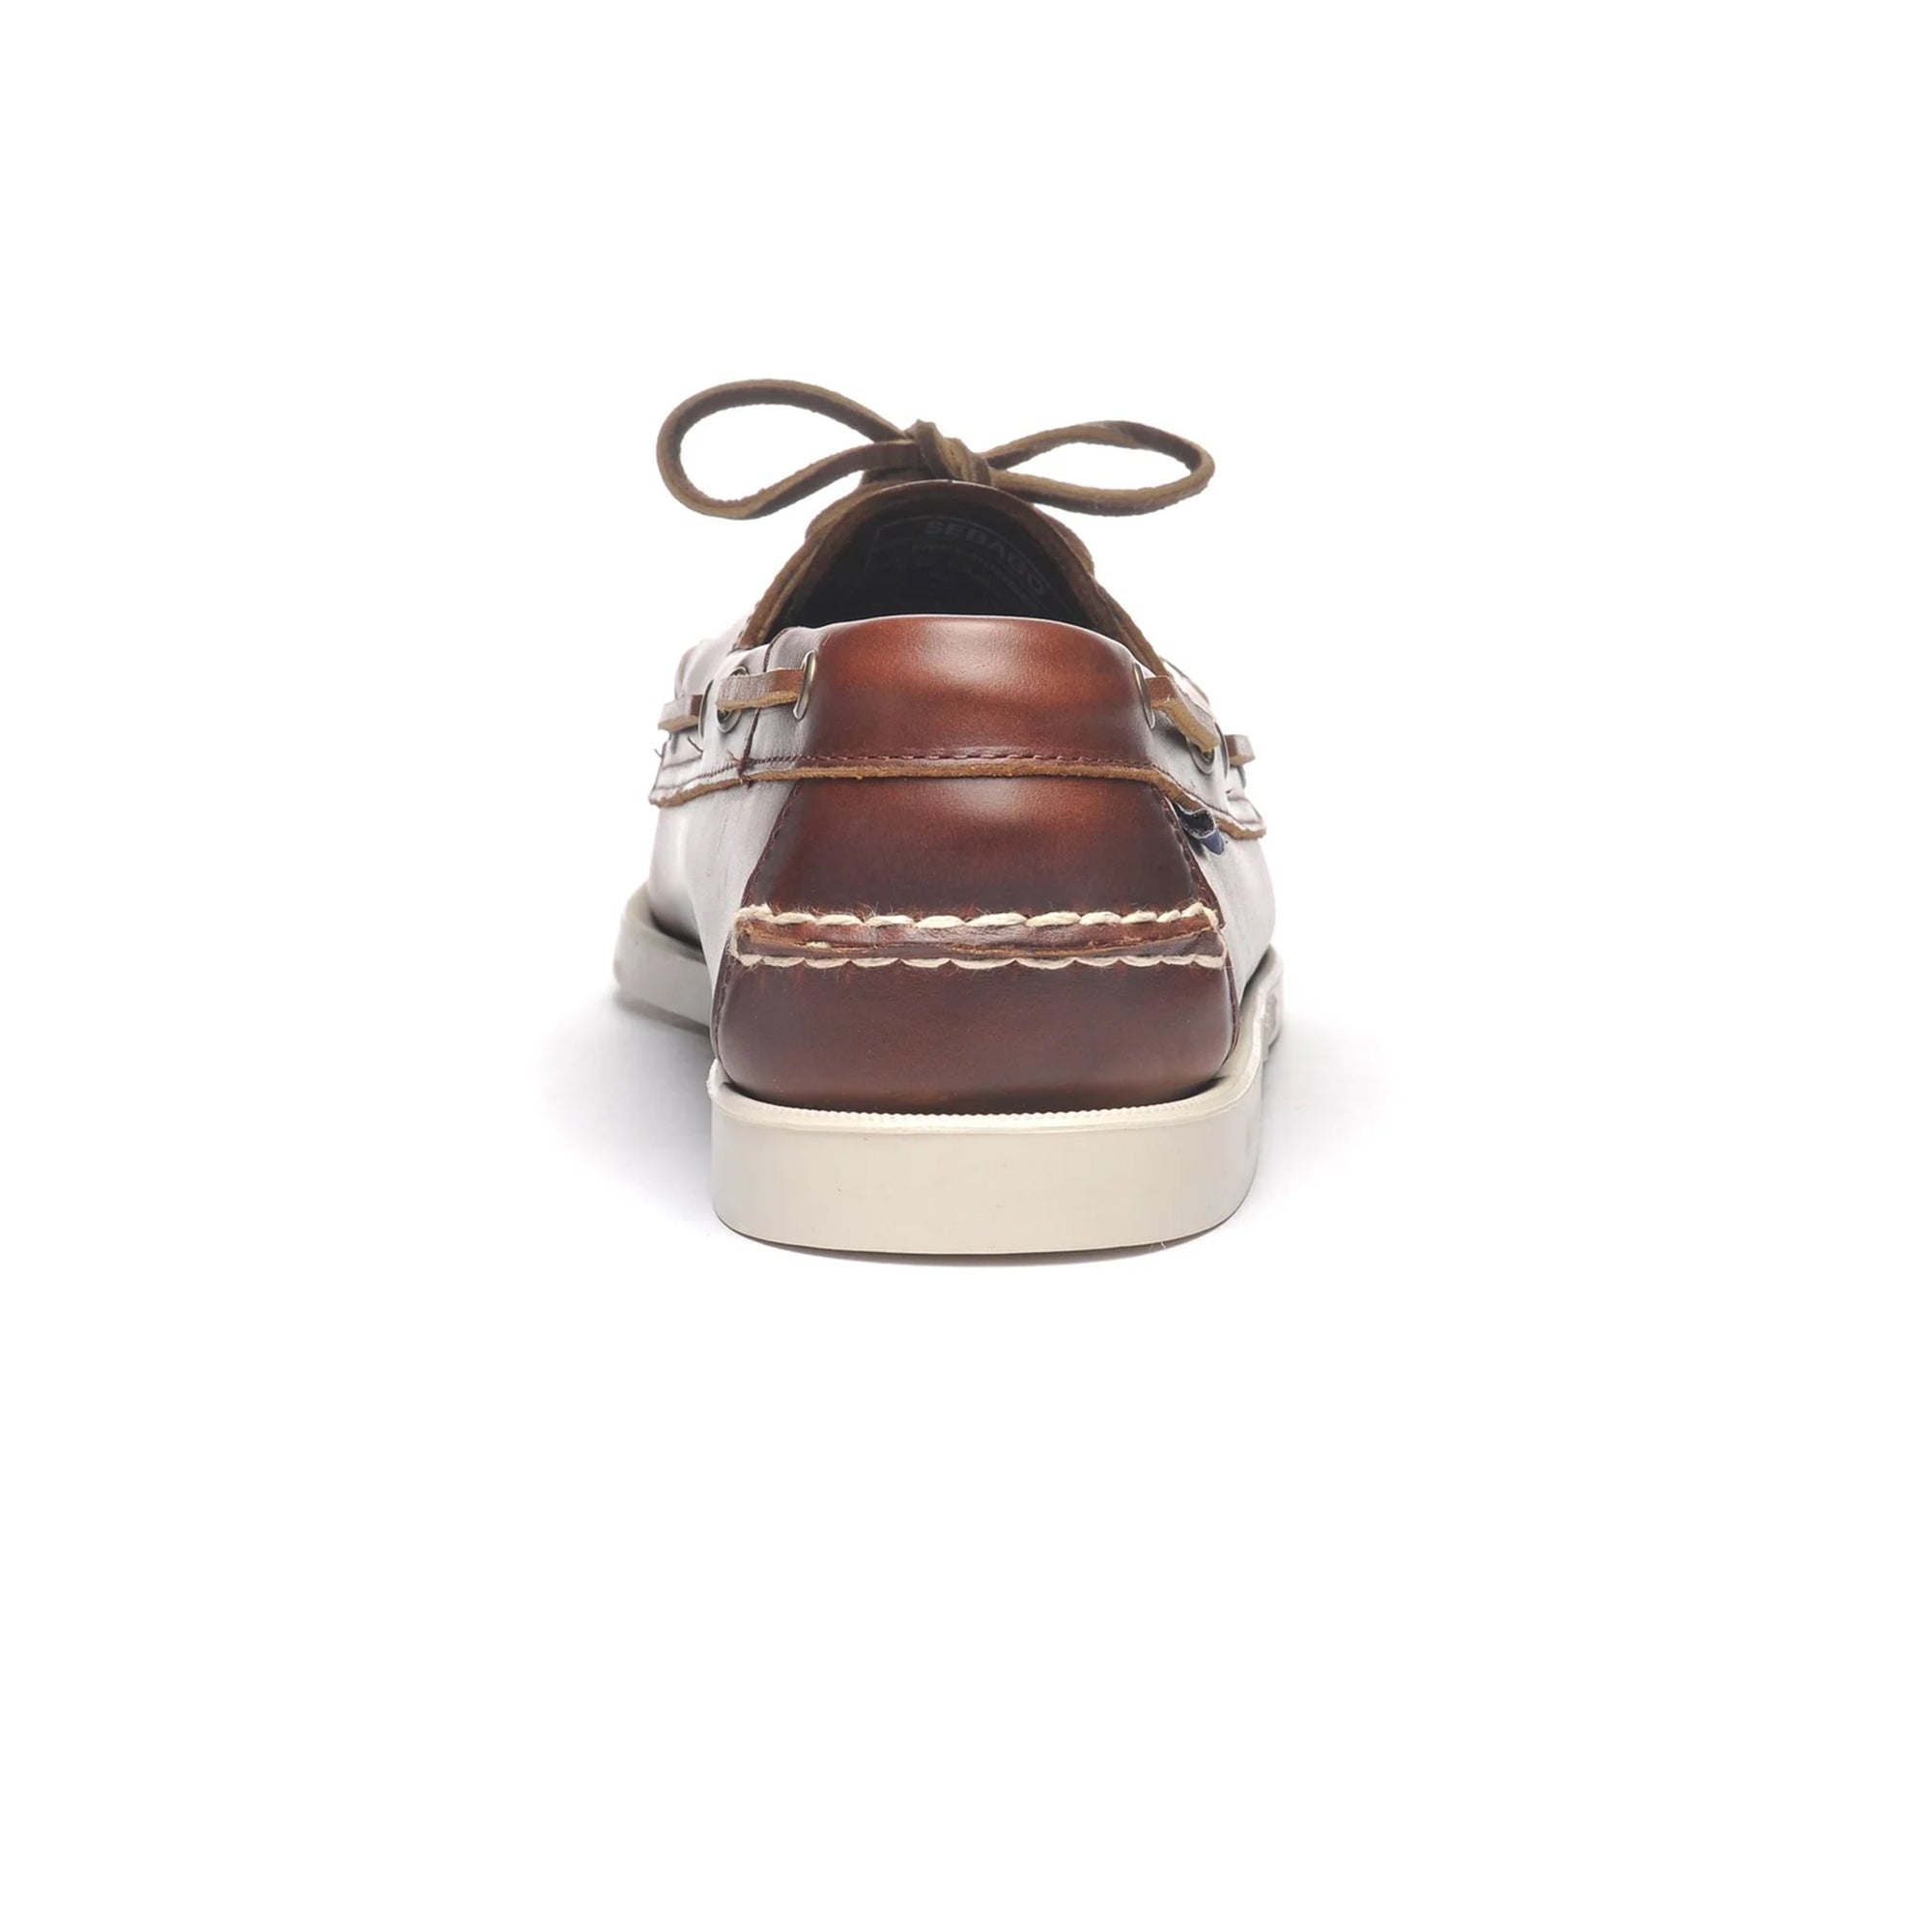 Sebago Docksides Portland Waxed Leather Boat Shoes - Brown / White